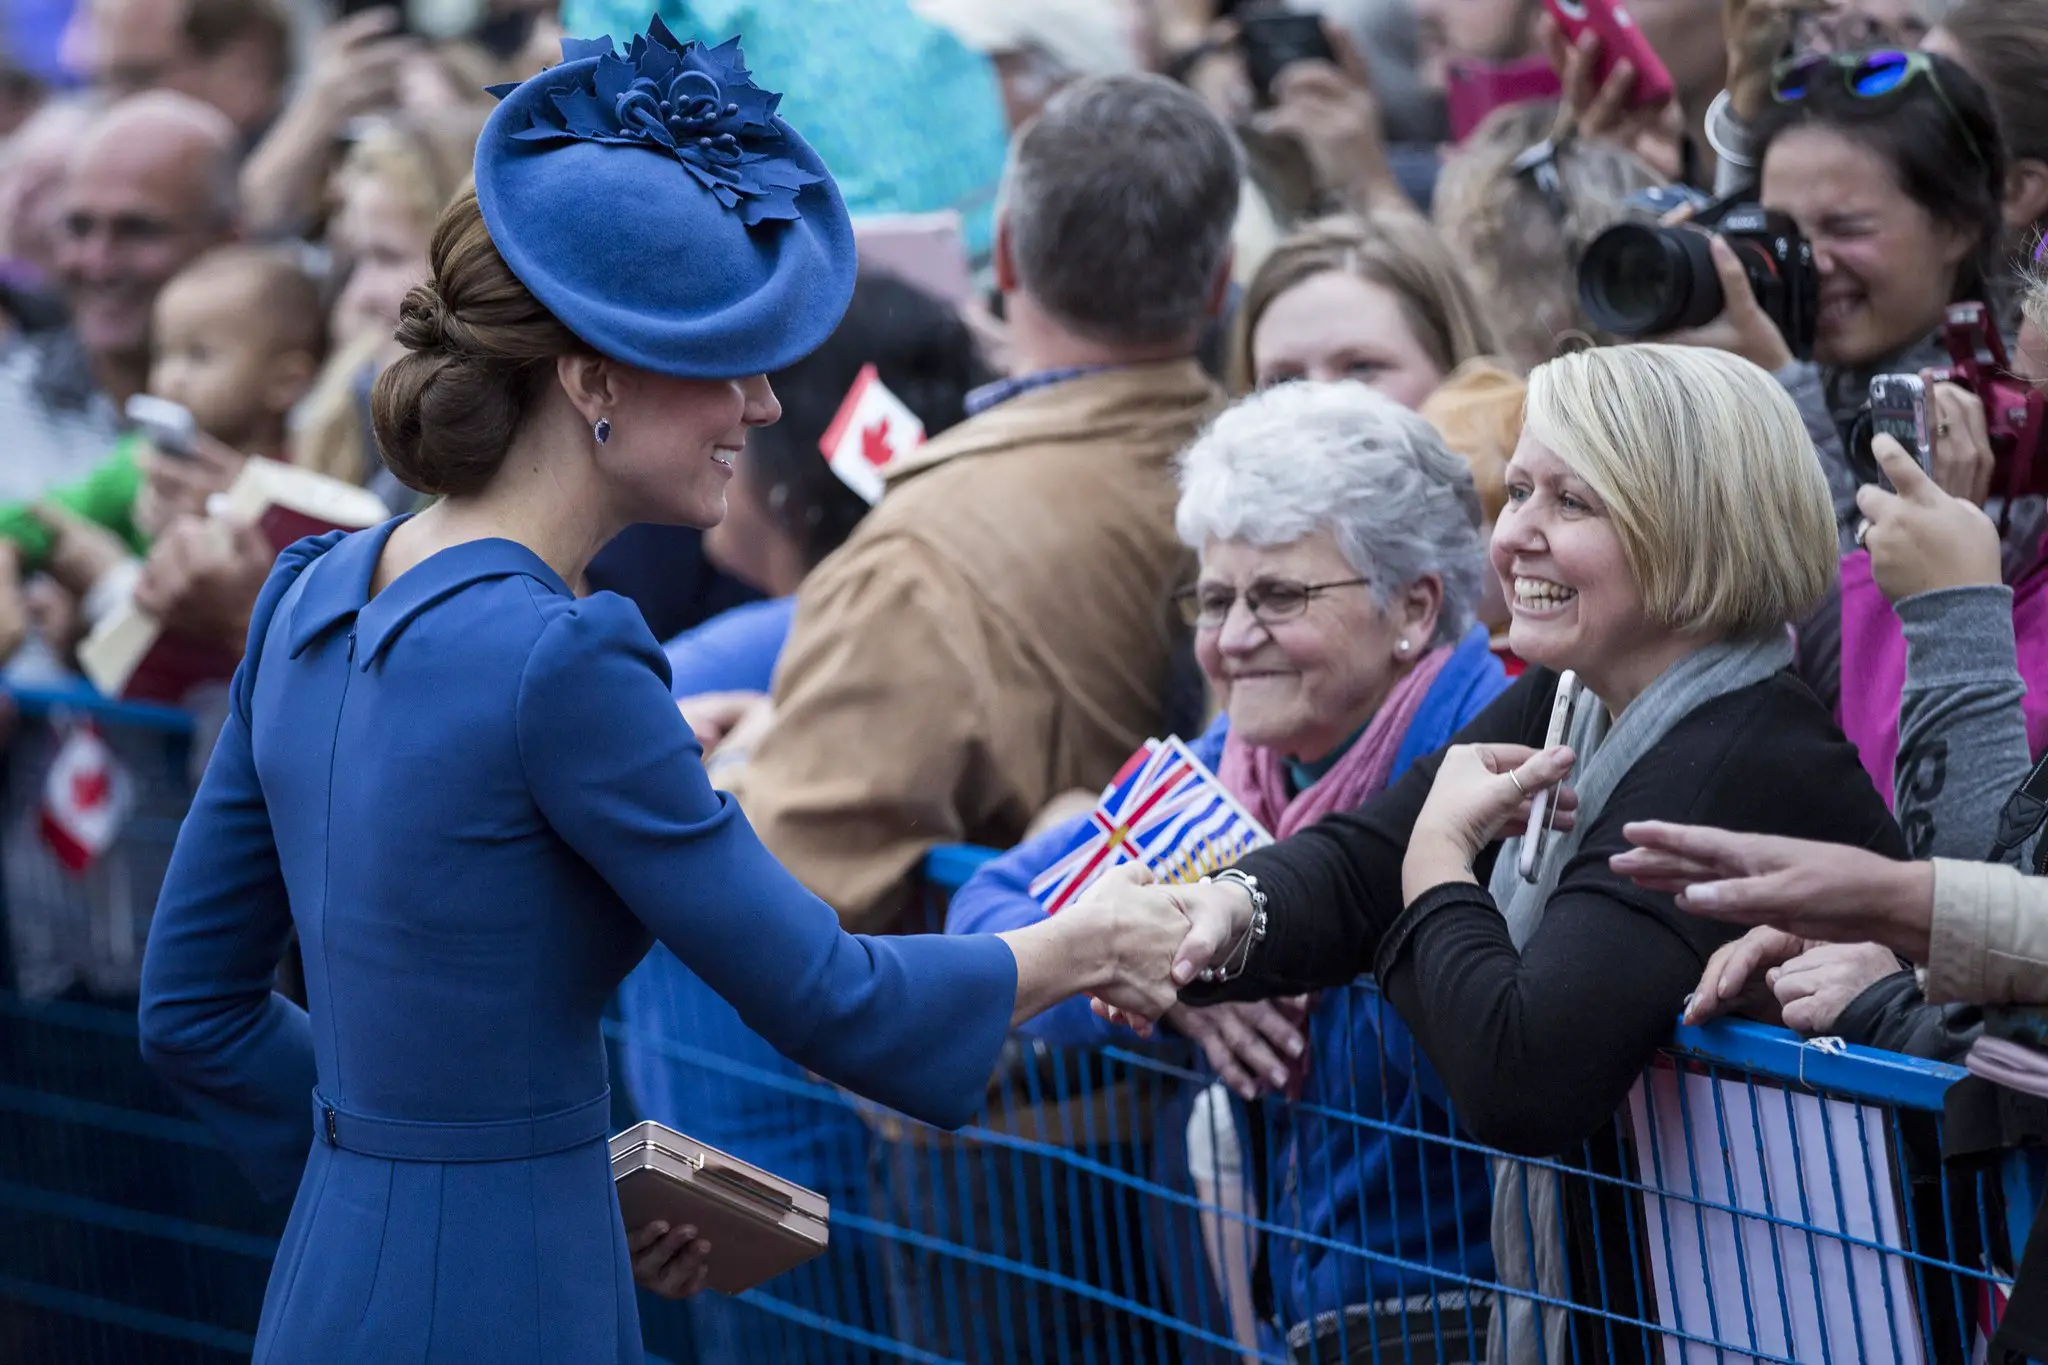 The Duchess of Cambridge meeting with the public during welcome ceremony in Canada in 2016